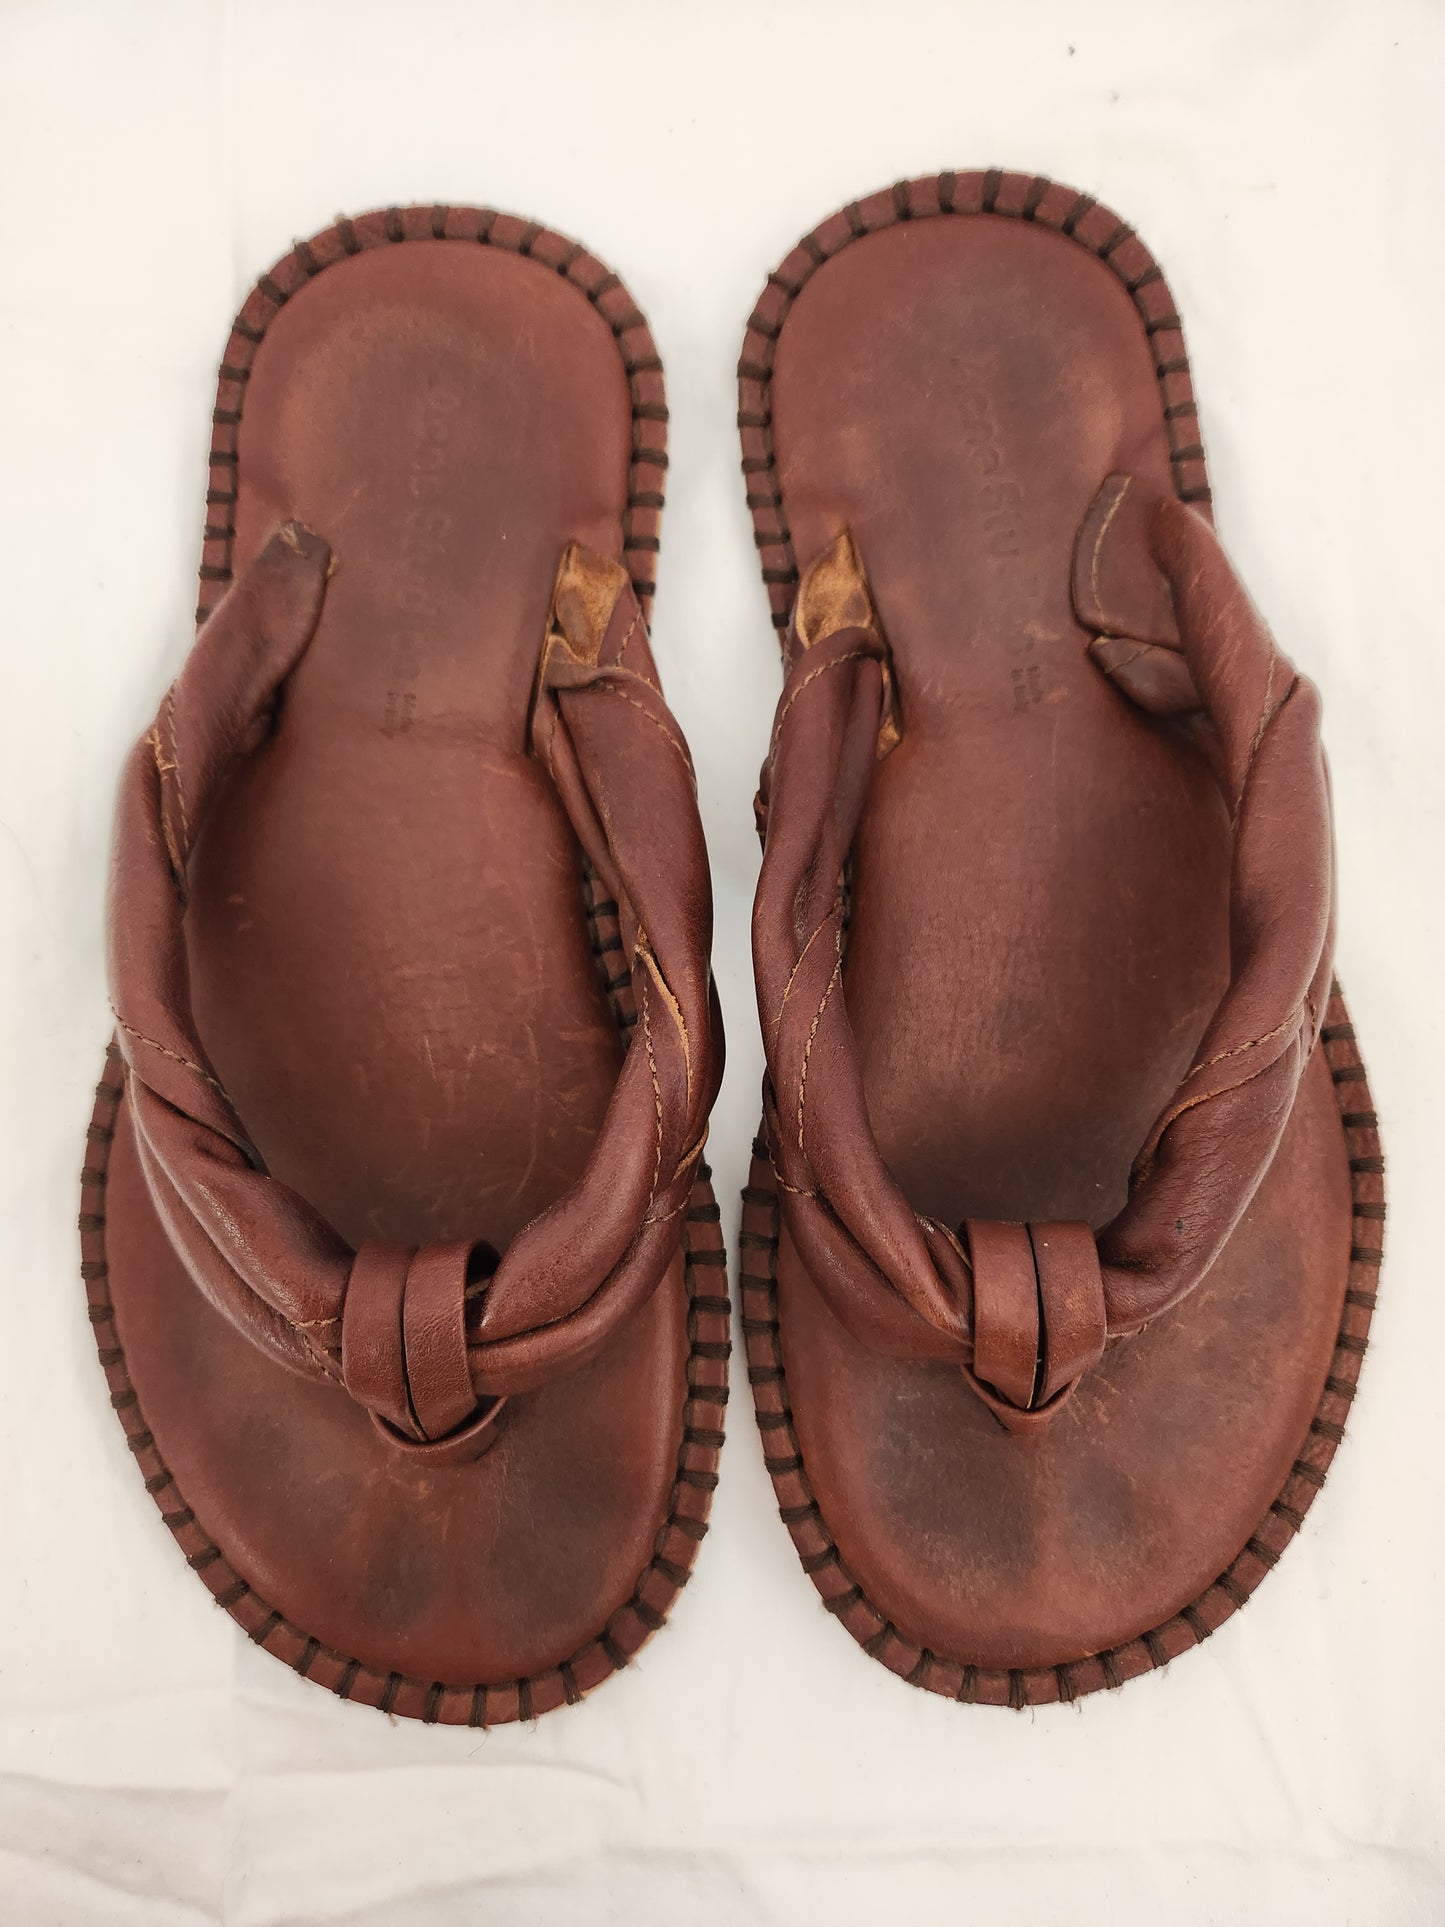 Acne Studios Chestnut Brown Leather Thong Flat Sandal - Size: 40 (US 8.5/9)